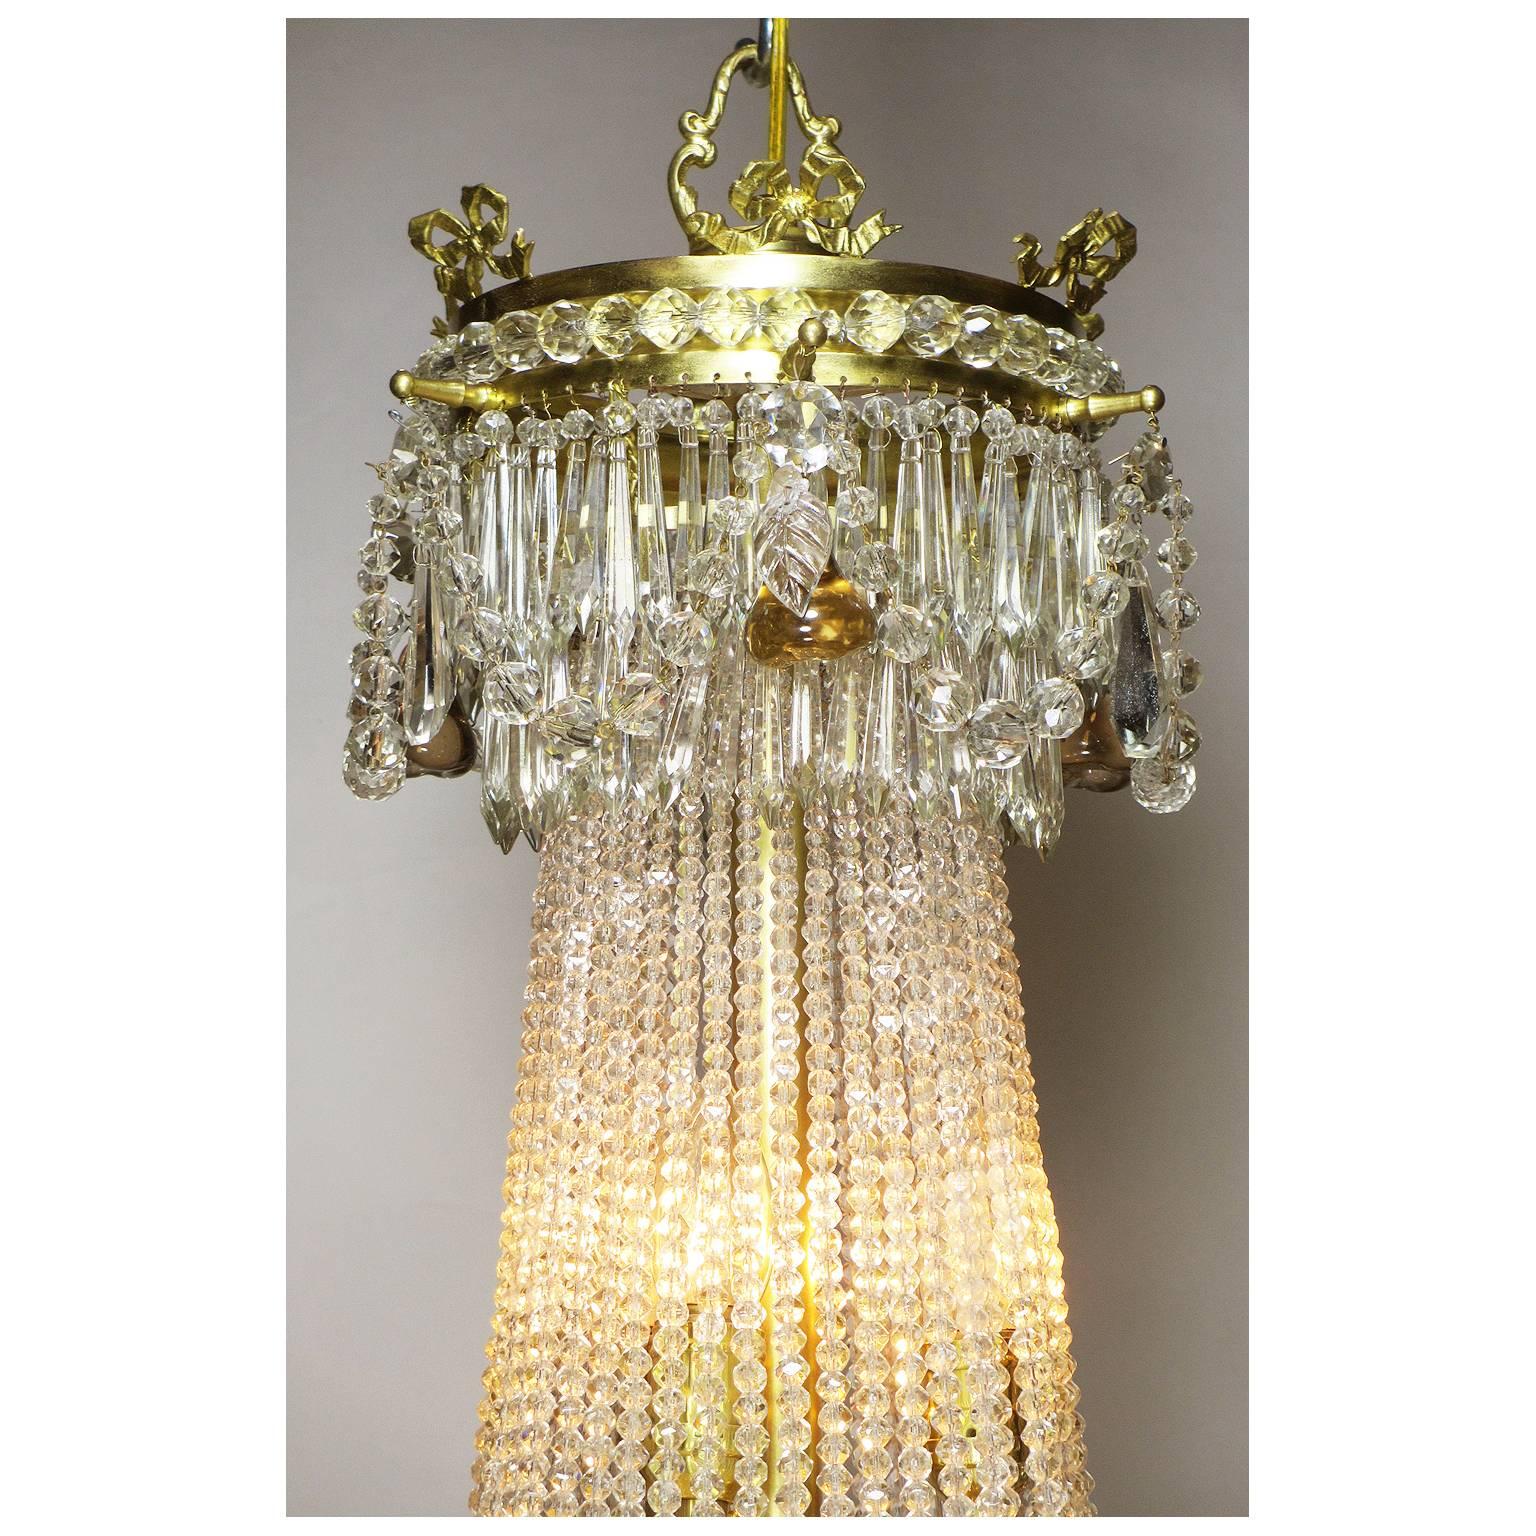 Early 20th Century French 19th-20th Century Louis XVI Style Beaded Glass and Gilt-Metal Chandelier For Sale